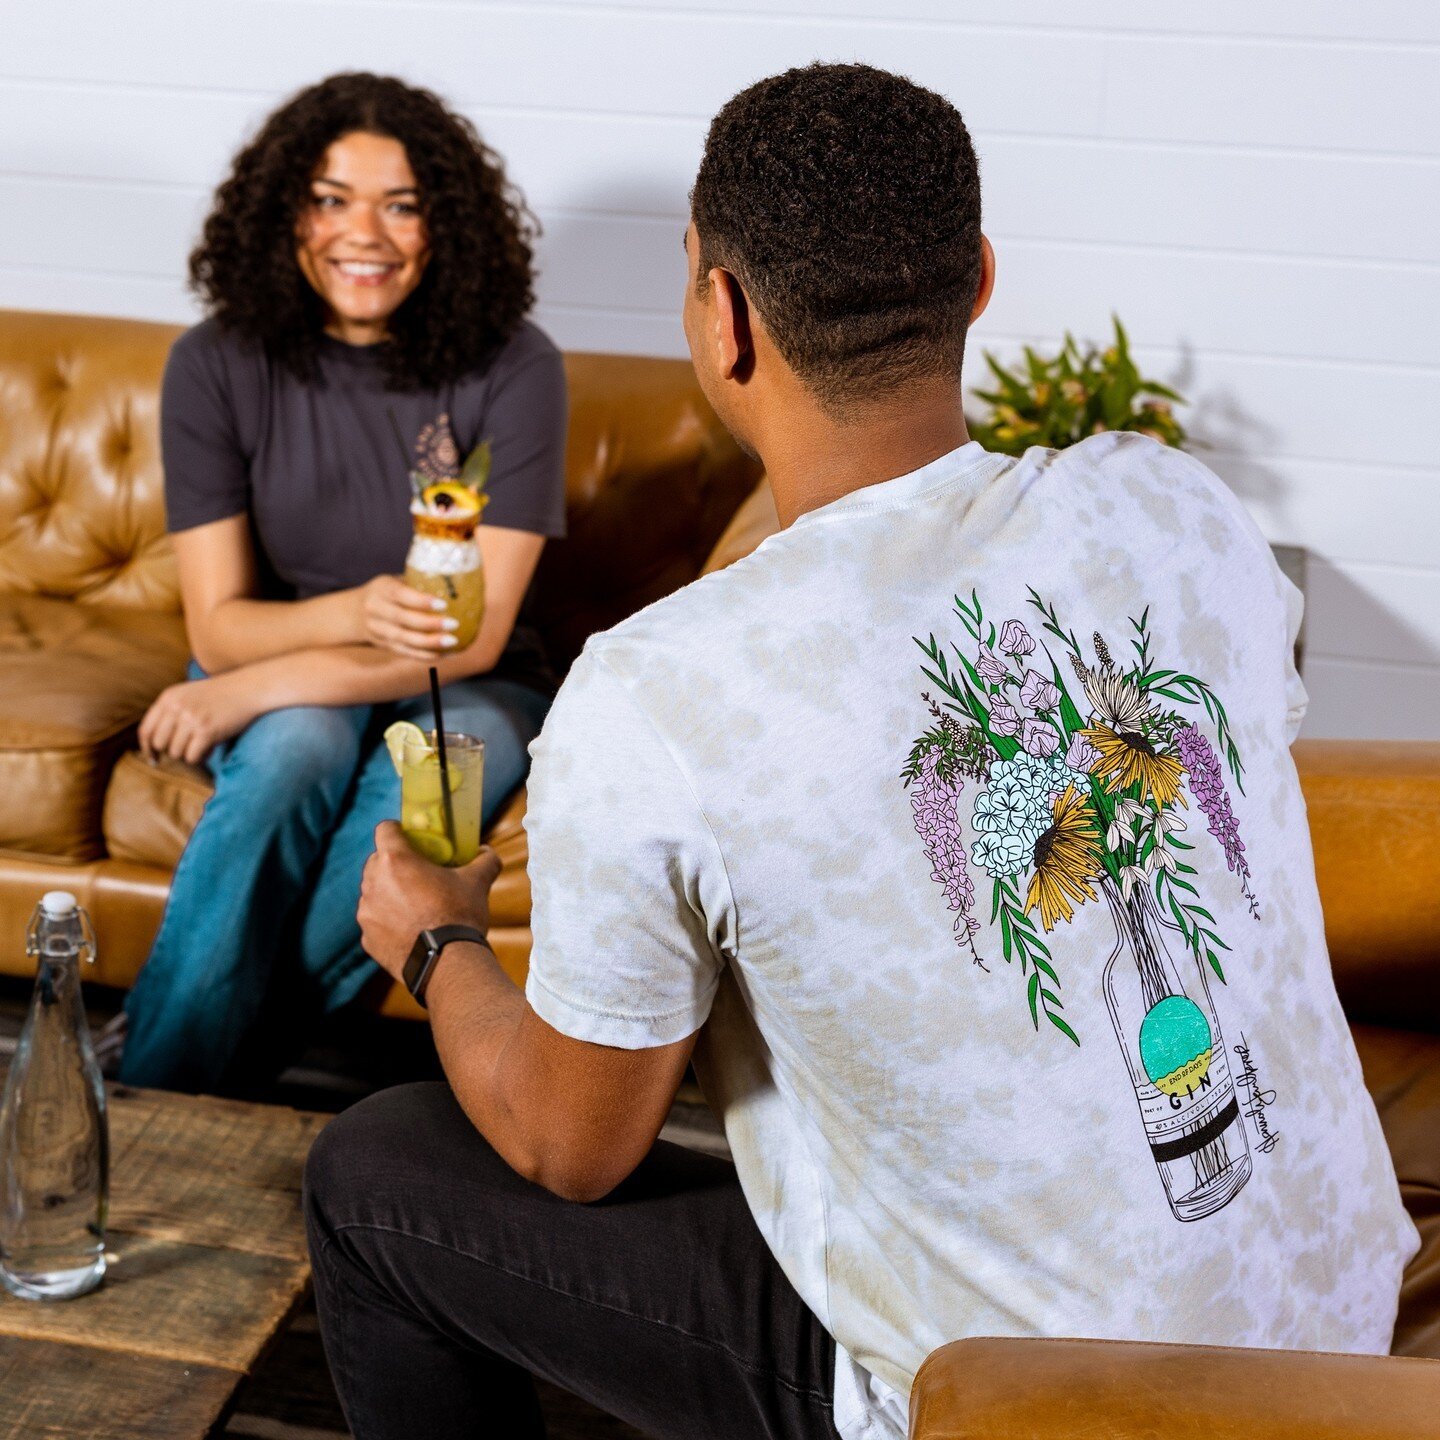 𝐁𝐚𝐜𝐤 𝐢𝐧 𝐬𝐭𝐨𝐜𝐤!⁣⁠
⁣⁠
Our &quot;Flowery&quot; Botanical Gin Shirt is back in stock. You can almost smell the bright fresh flavors from our Port of Entry Gin with blooming flowers growing wild around it. Printed on a @bellacanvas tie-dye tee 